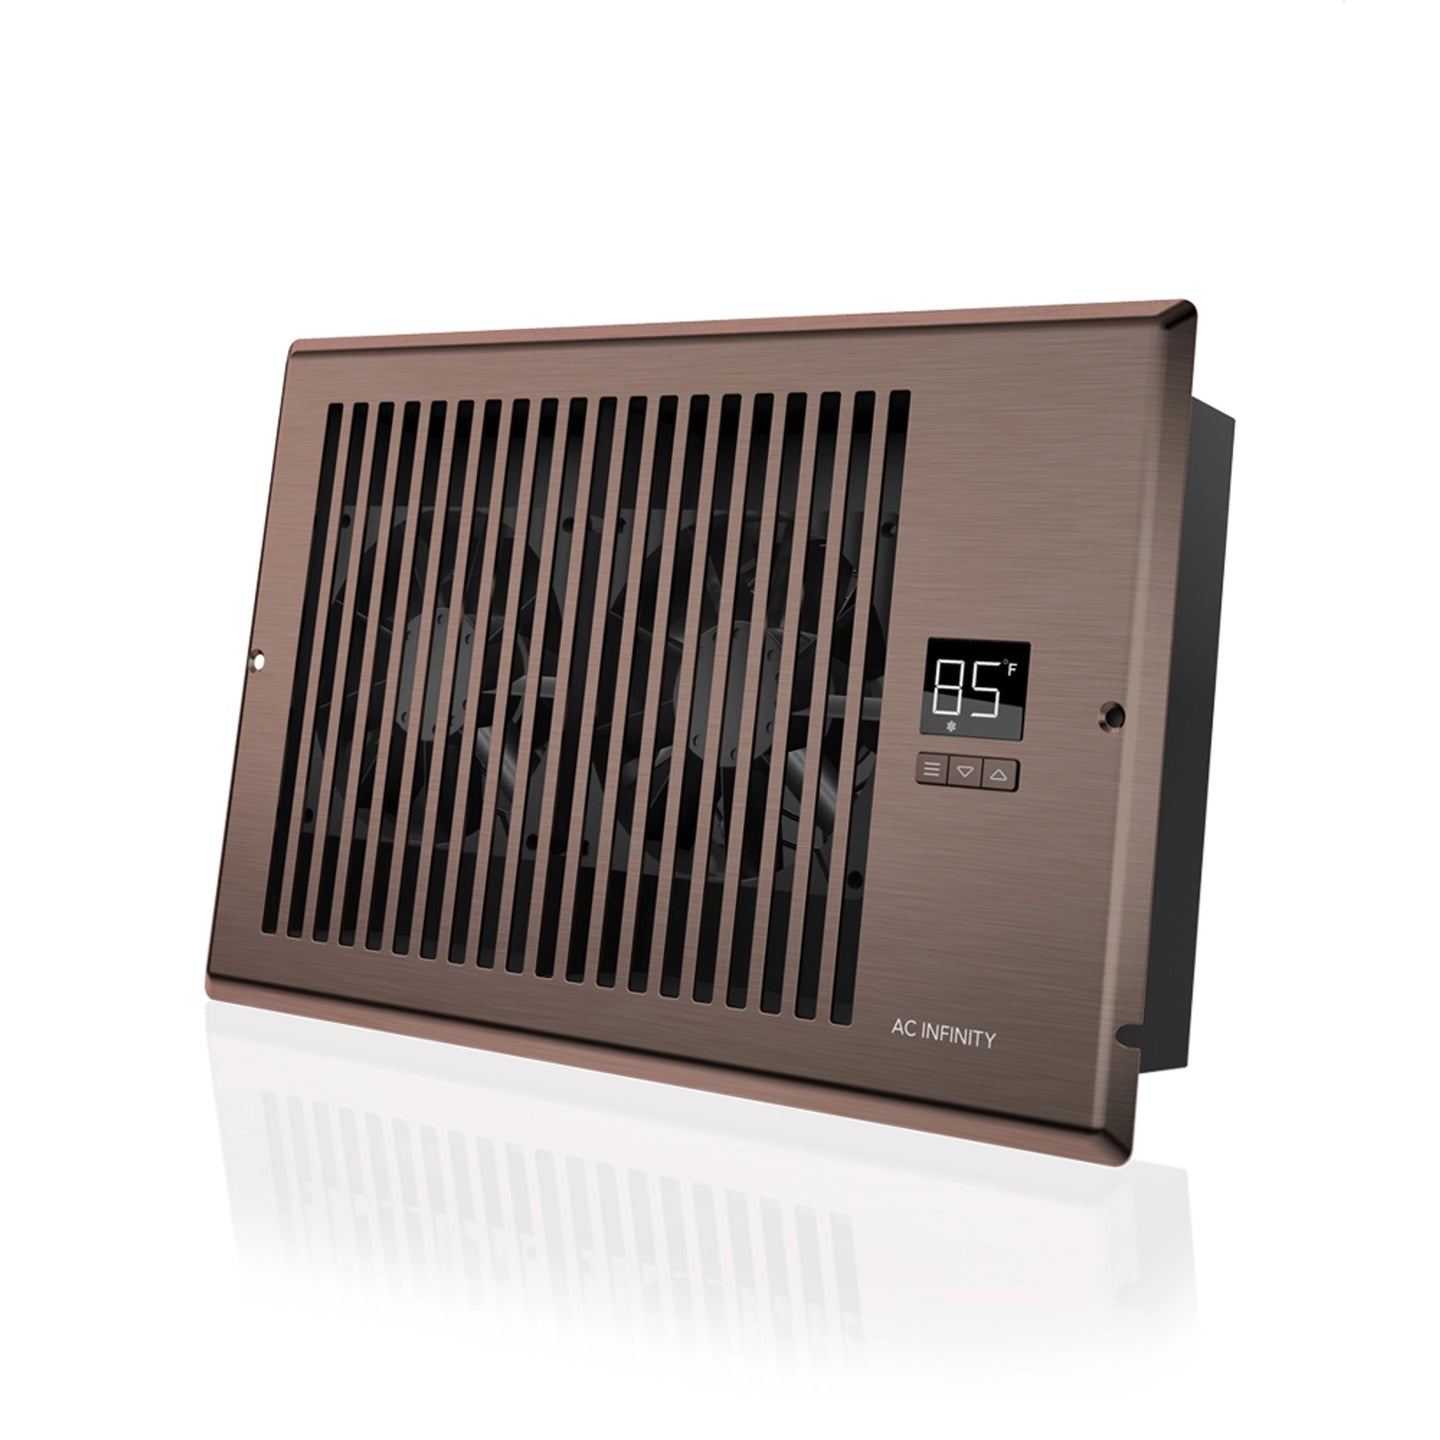 AC Infinity AIRTAP T6, Quiet Register Booster Fan System, Bronze, for 6